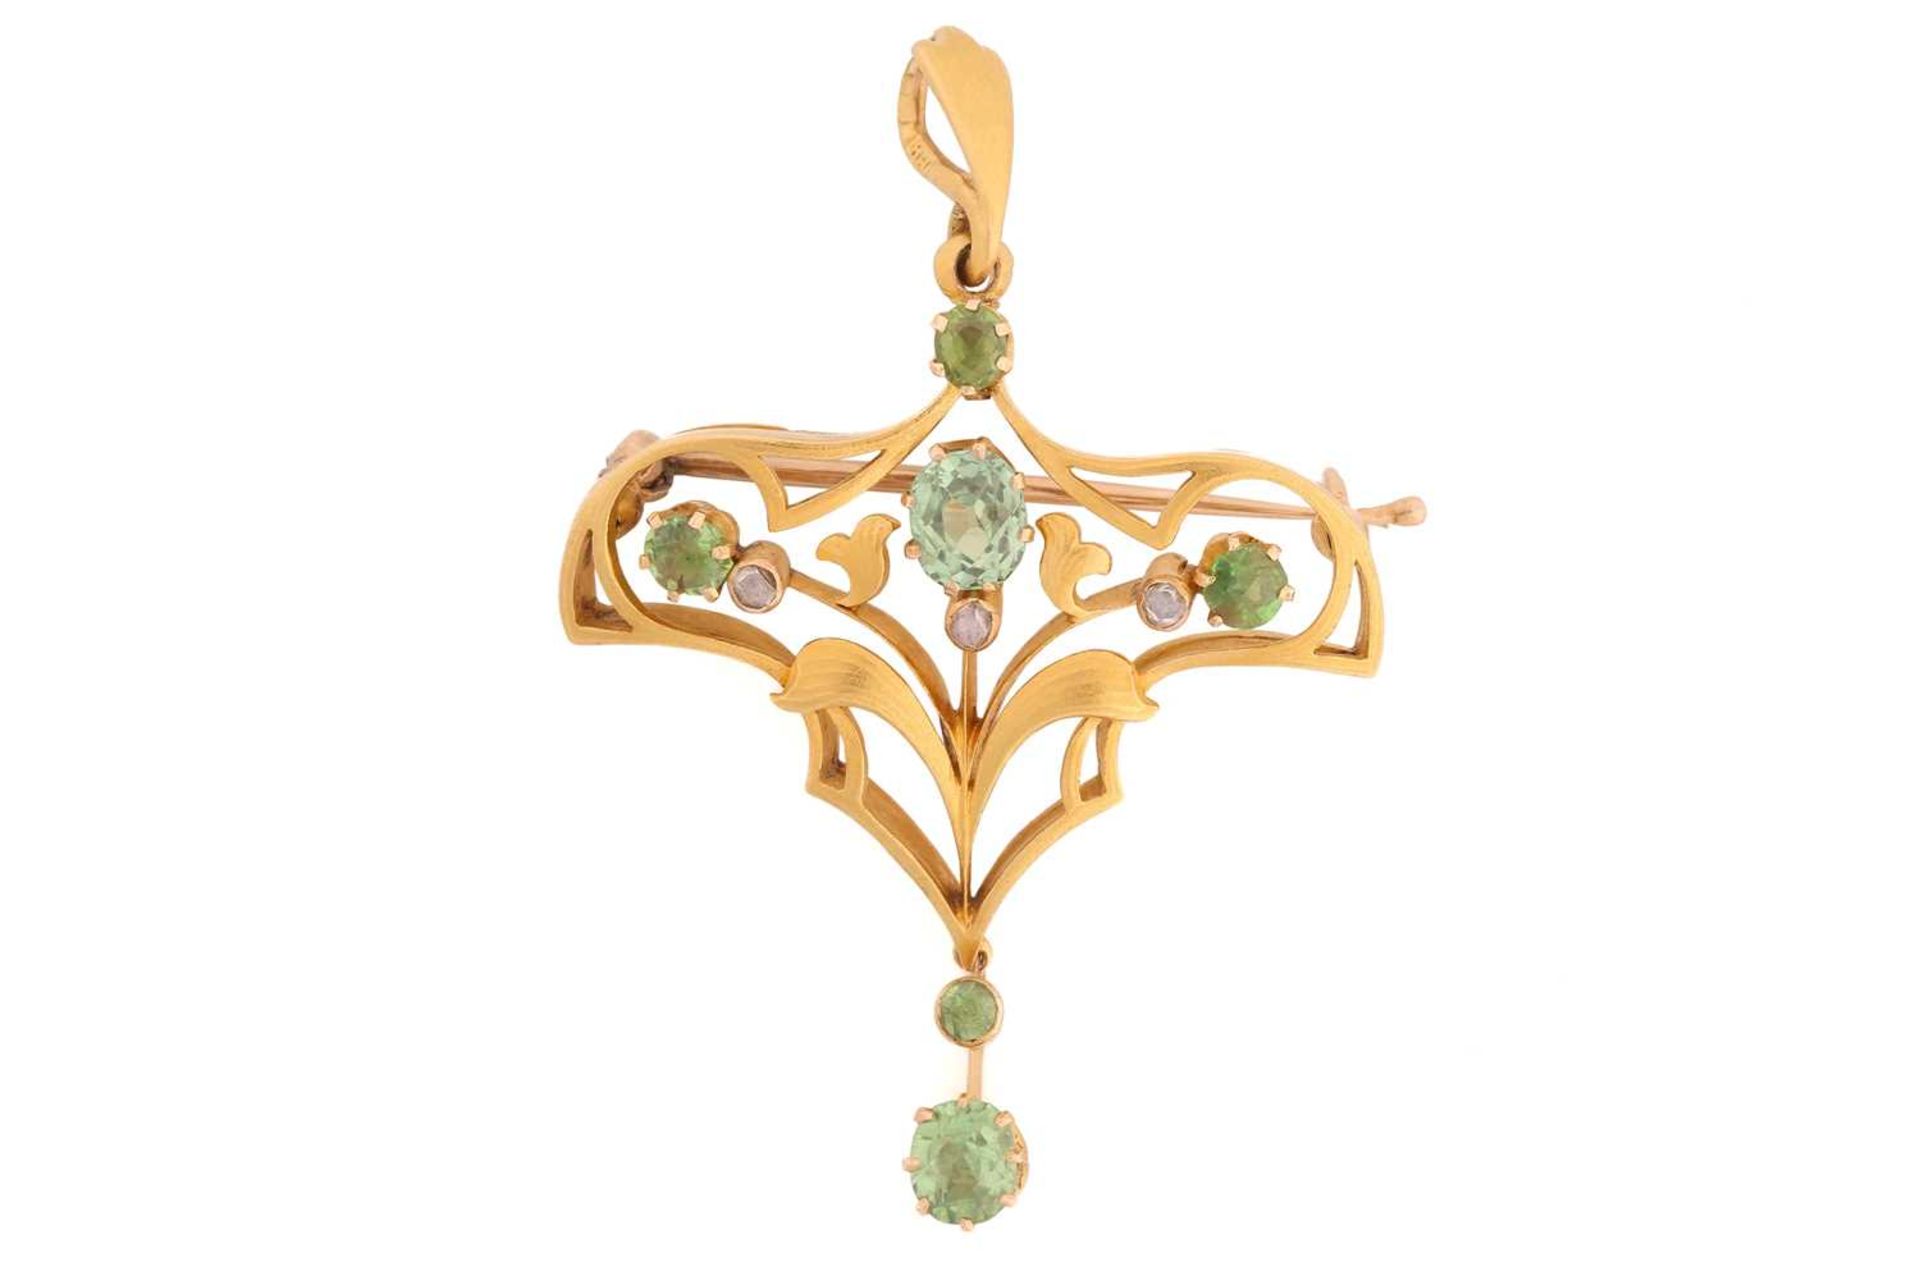 An early 20th-century Russian pendant brooch set with diamonds and demantoid garnets, of floral